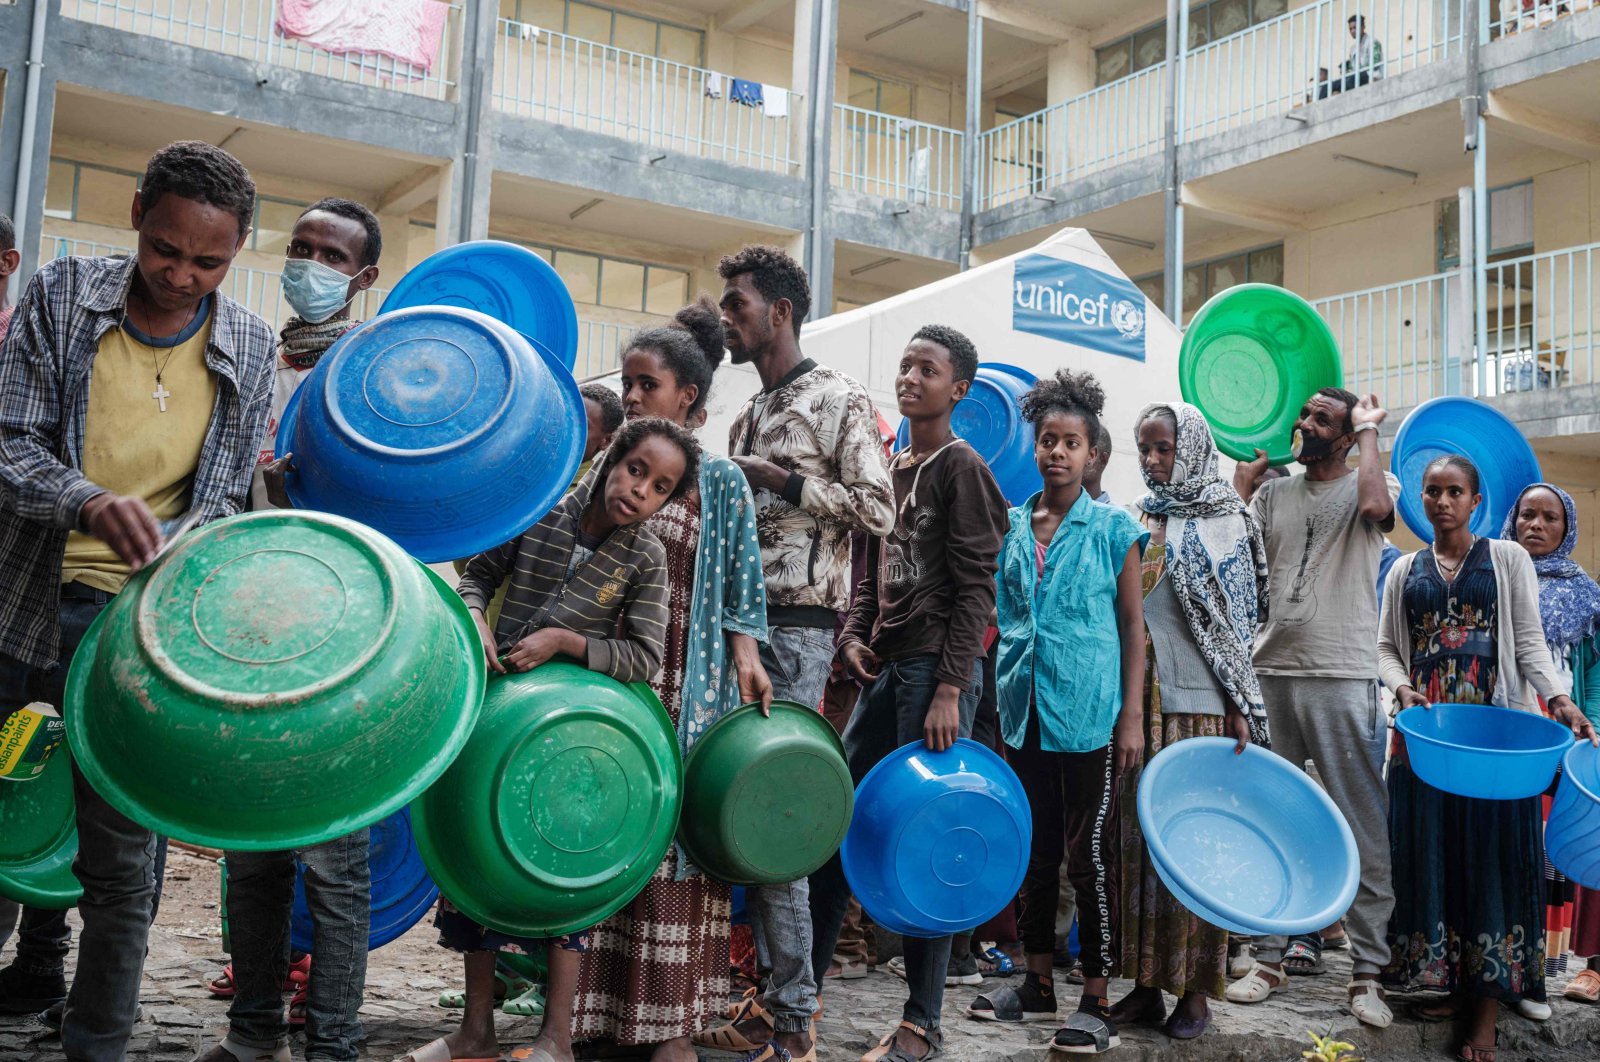 People who fled the violence wait to receive injeras, Ethiopia&#039;s staple food of sour fermented flatbread, as their only meal of the day at May Weyni secondary school in Ethiopia&#039;s embattled Tigray region, June 19, 2021. (AFP Photo)